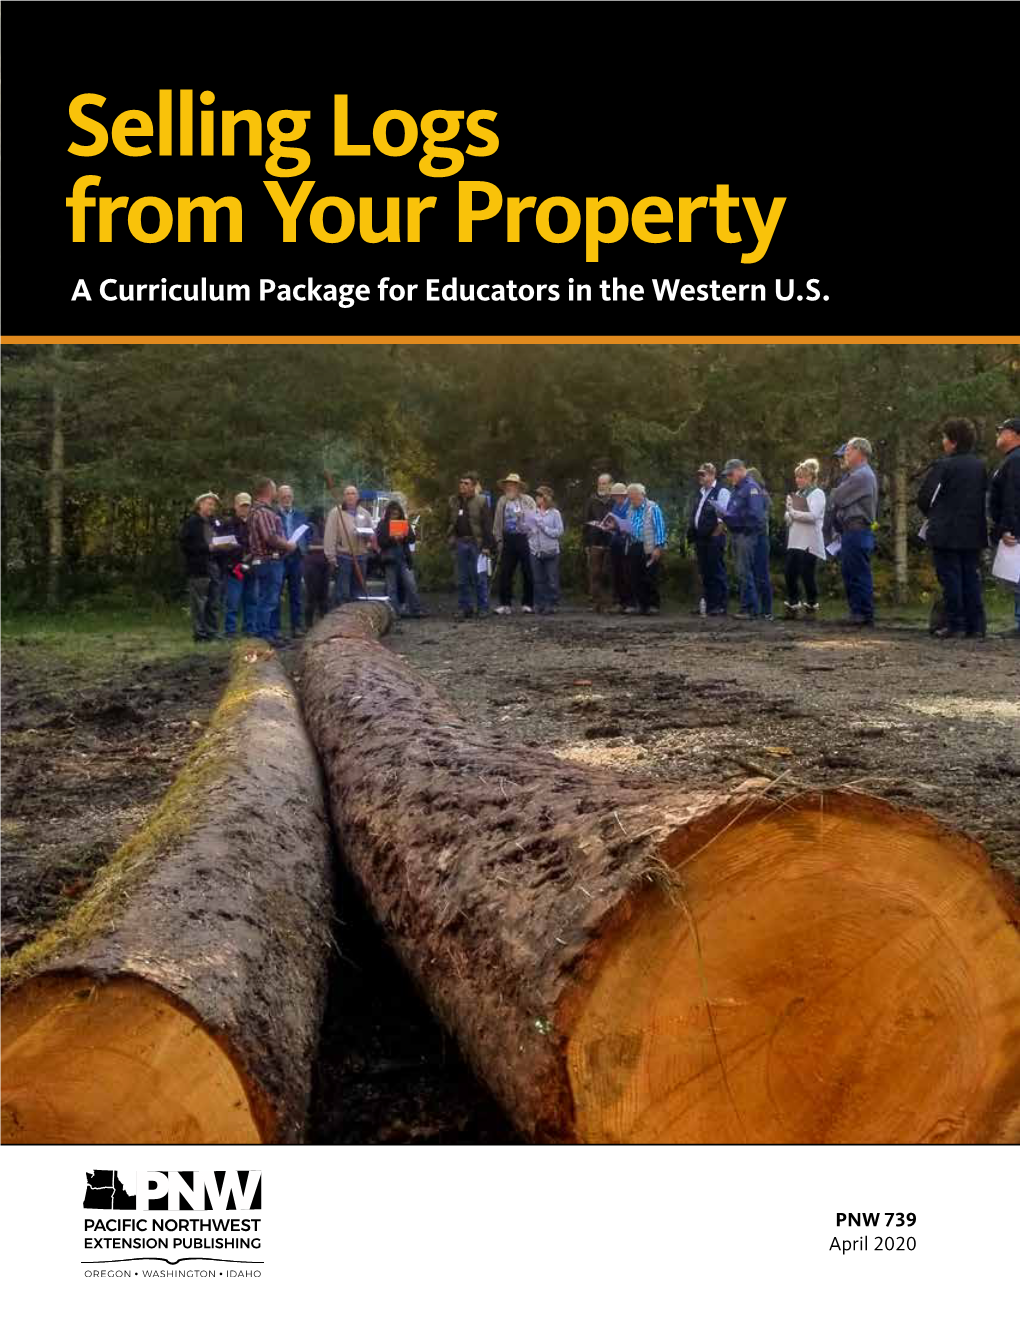 Selling Logs from Your Property a Curriculum Package for Educators in the Western U.S